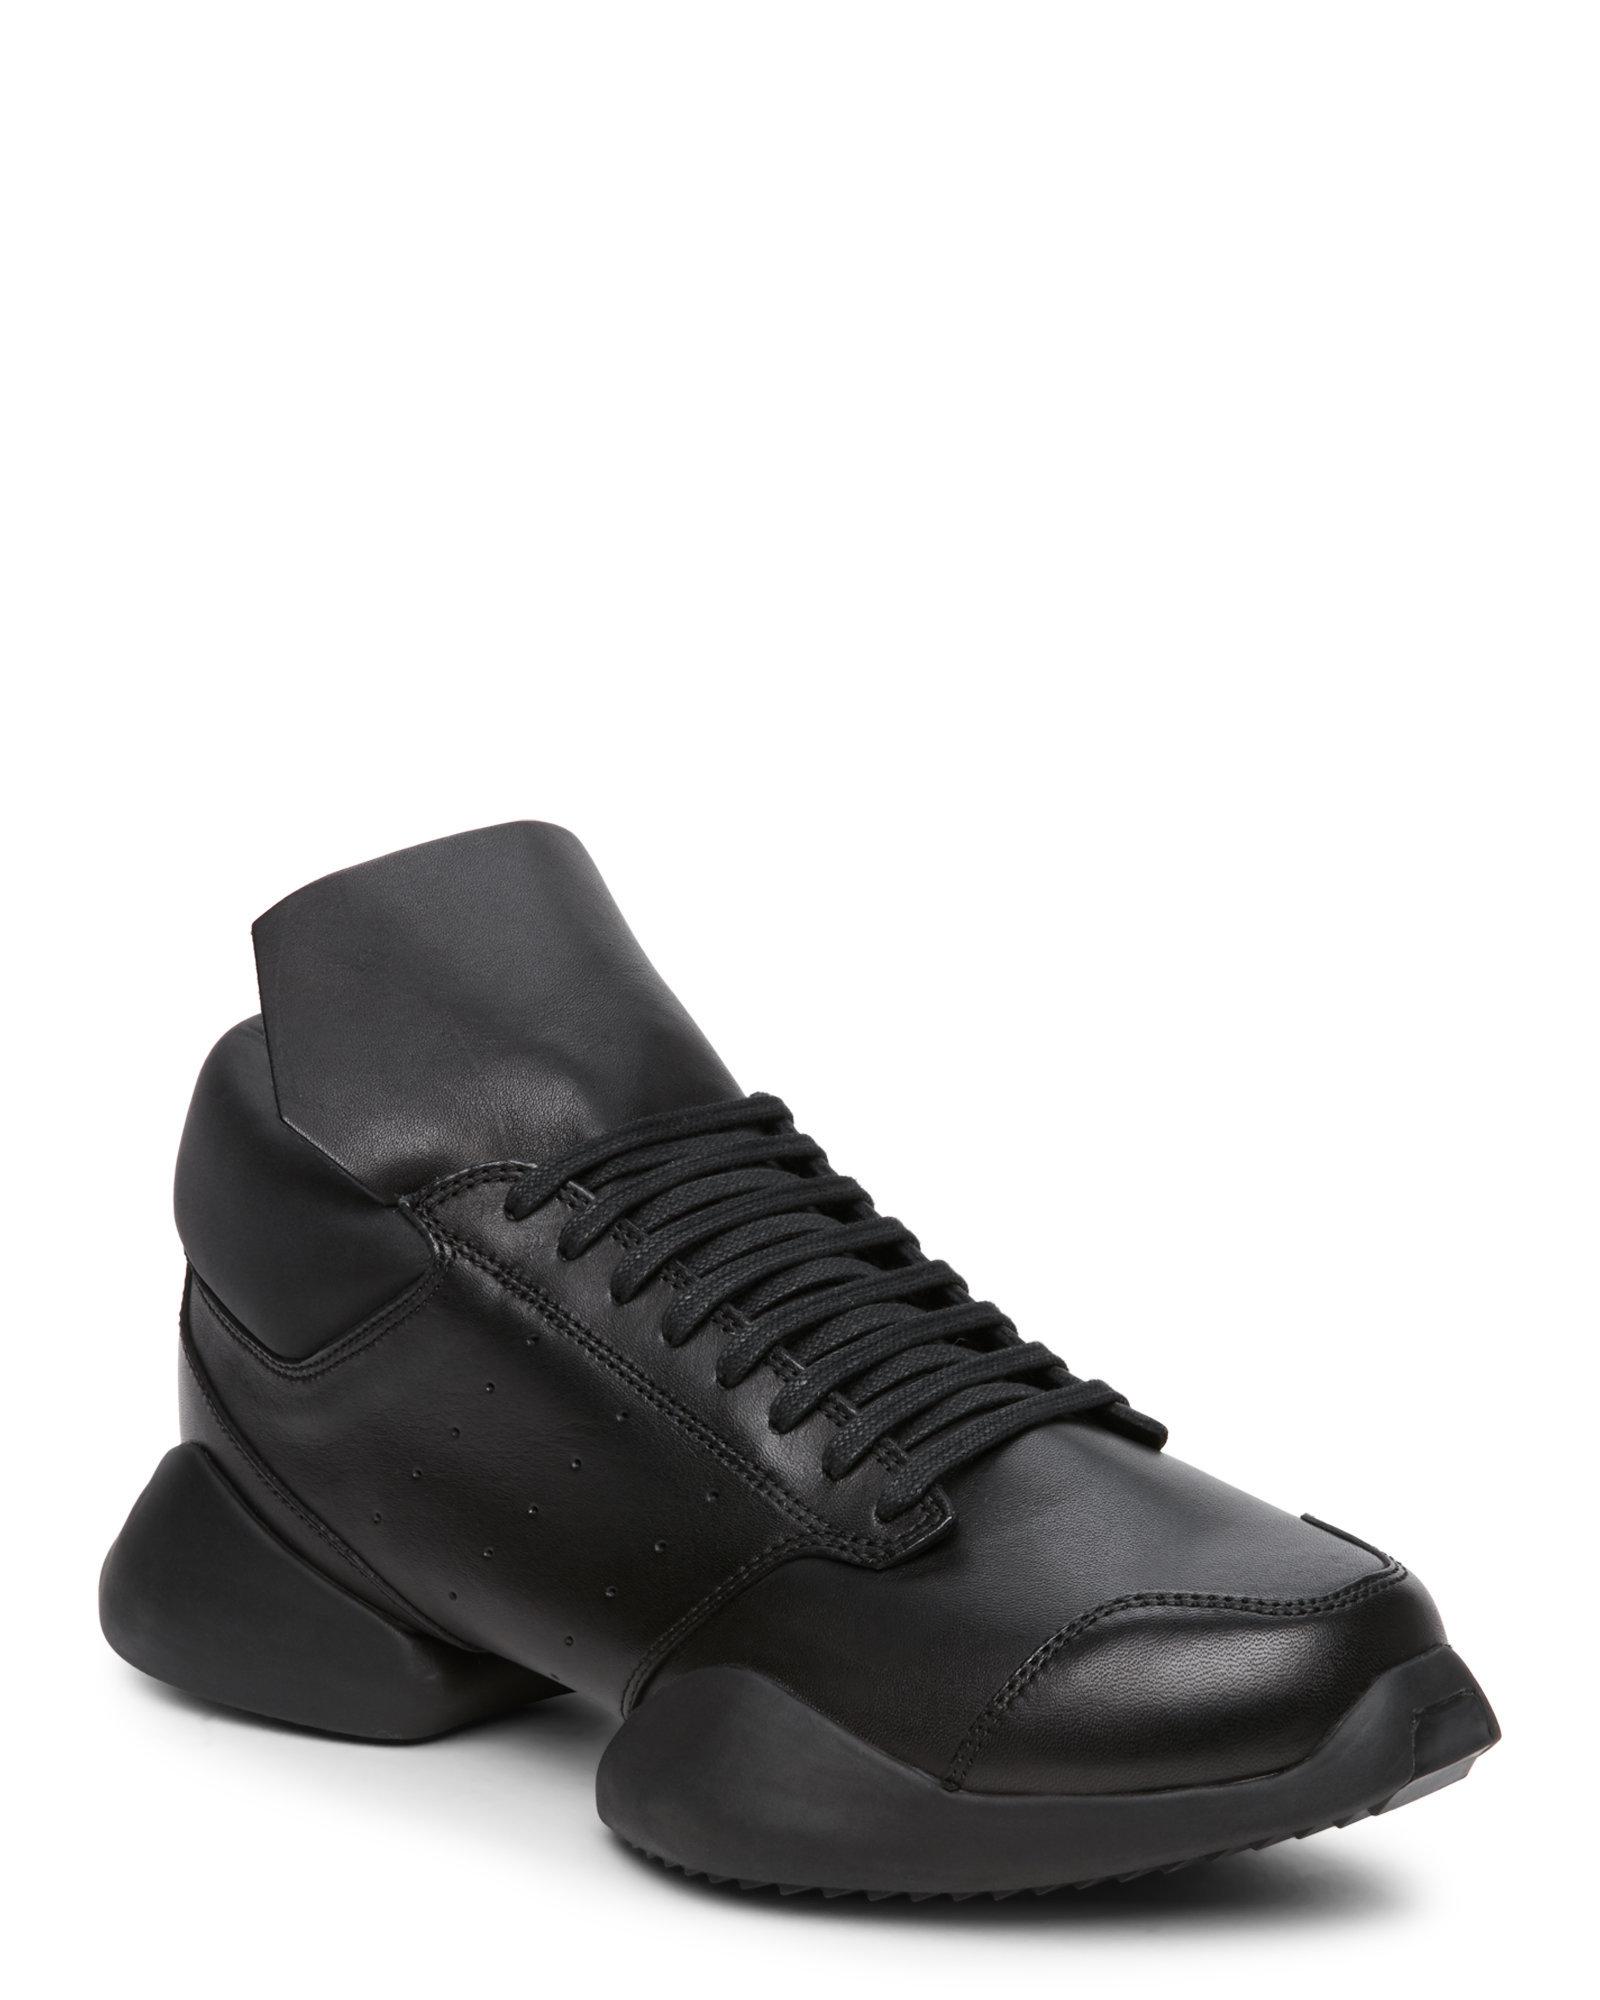 Rick Owens Vicious Runner Leather Sneakers in Black for Men - Lyst